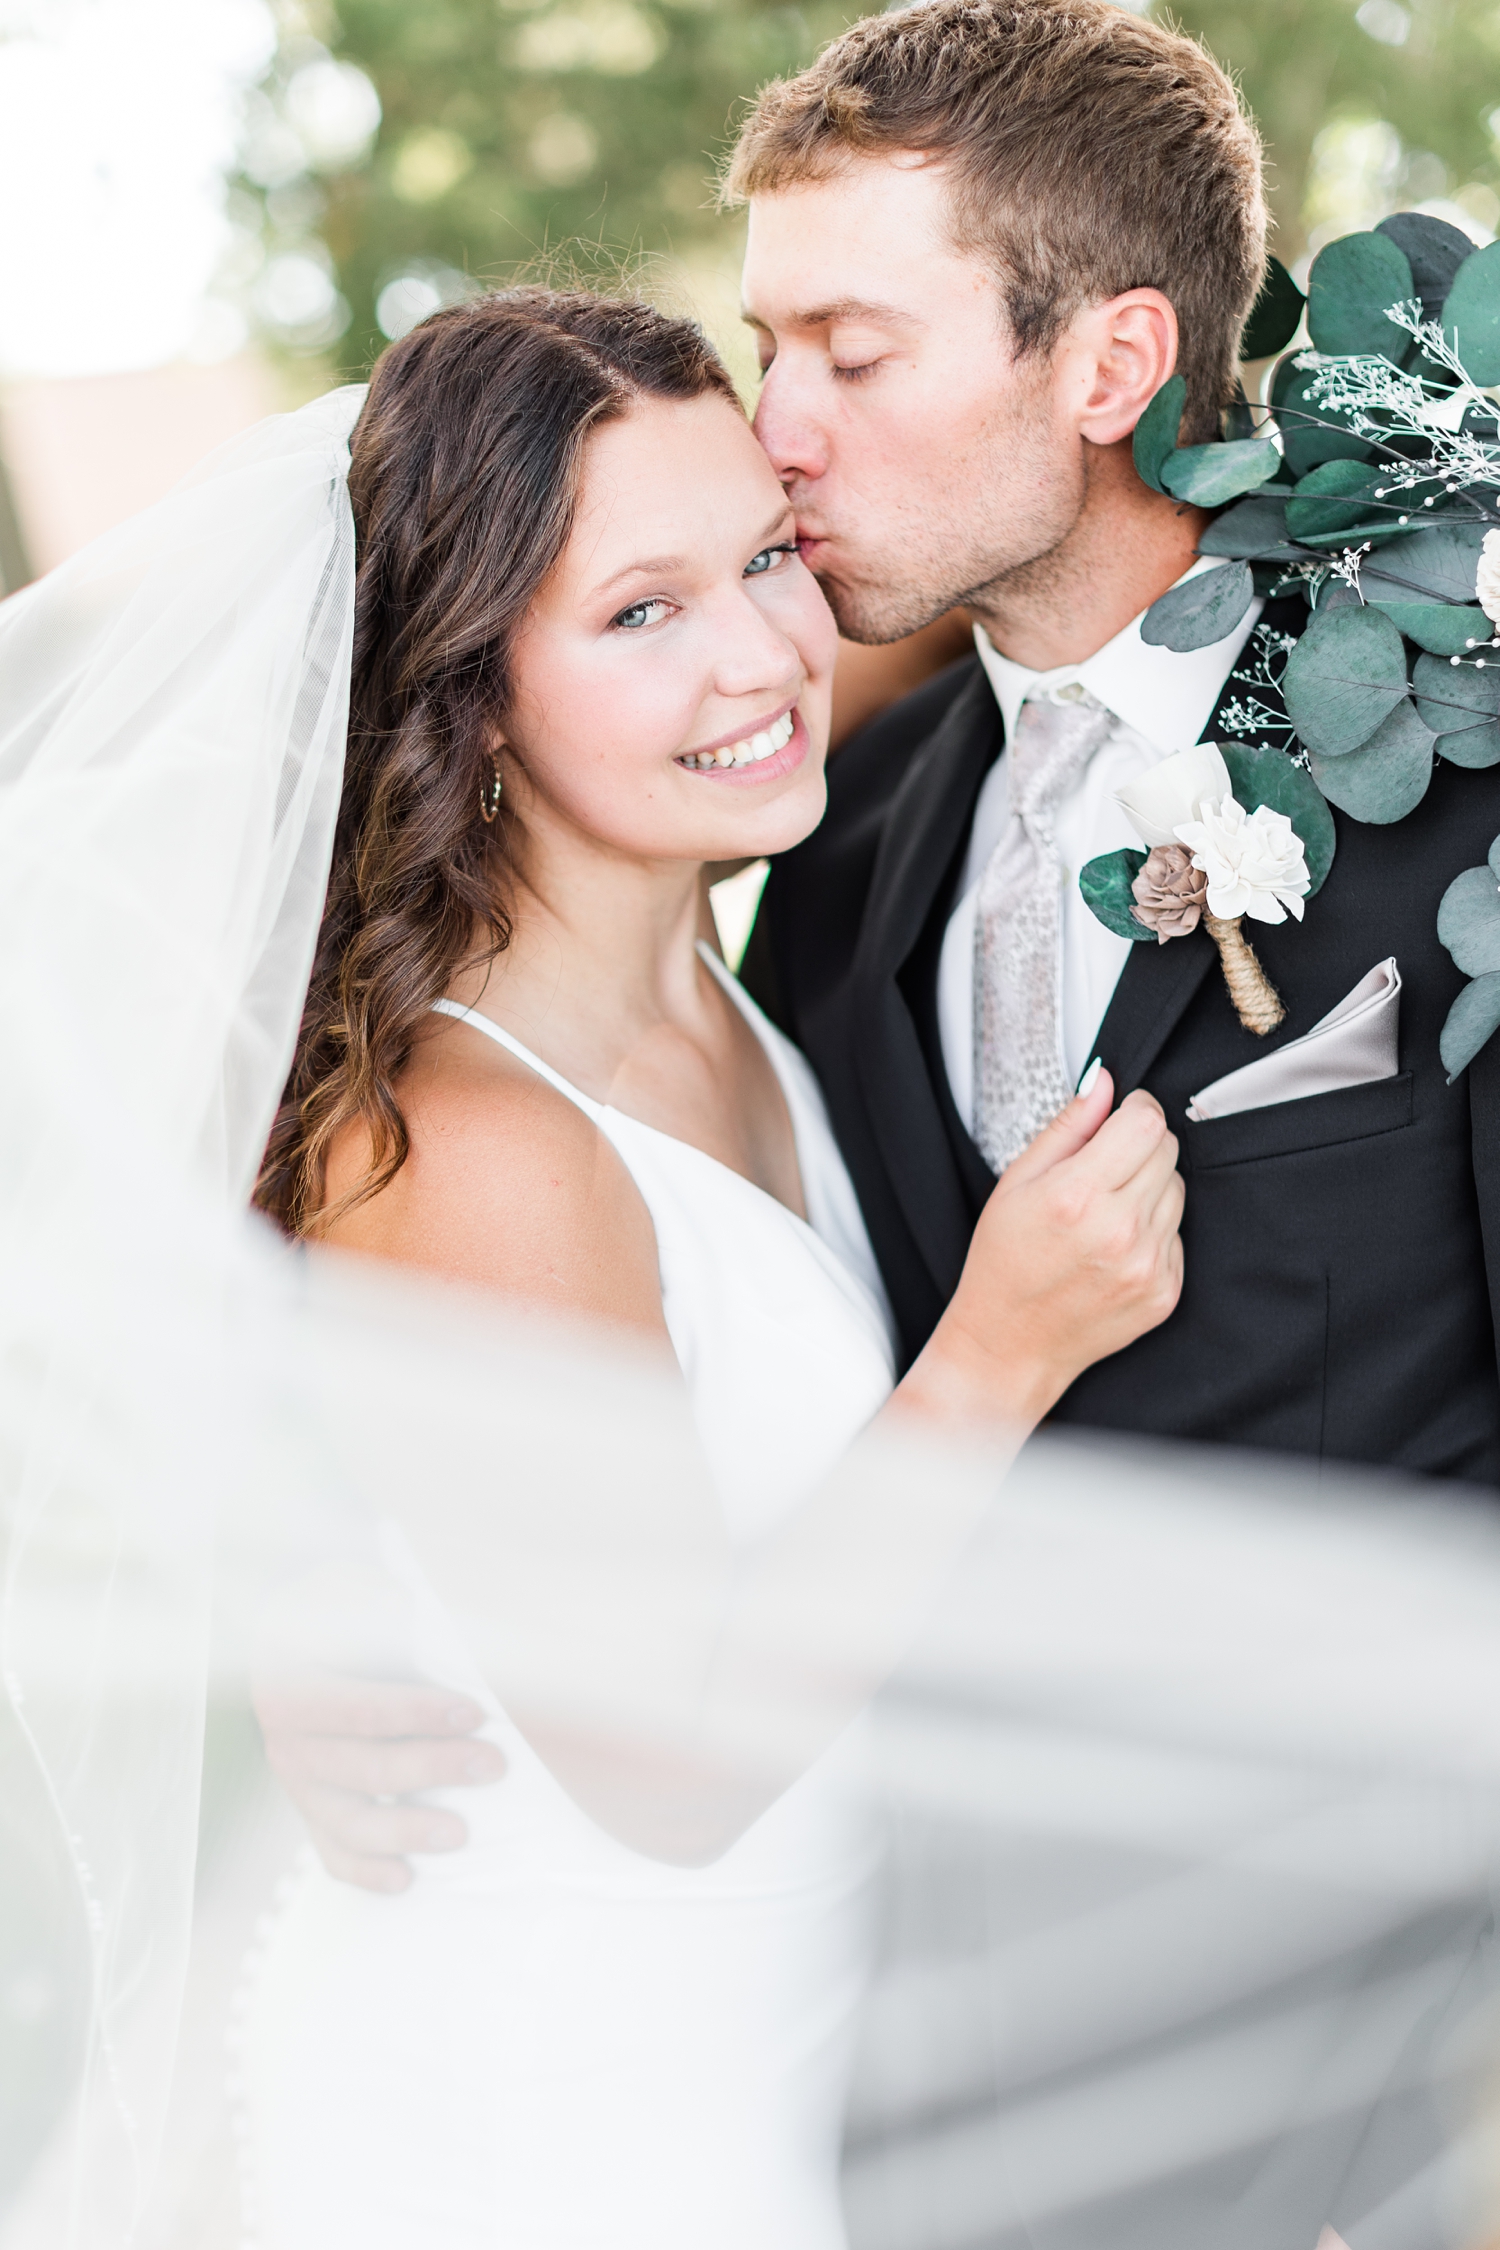 Grant kisses Alyssa on her cheek as her veil sweeps in front at 5 Island Campground in Emmetsburg, IA | CB Studio